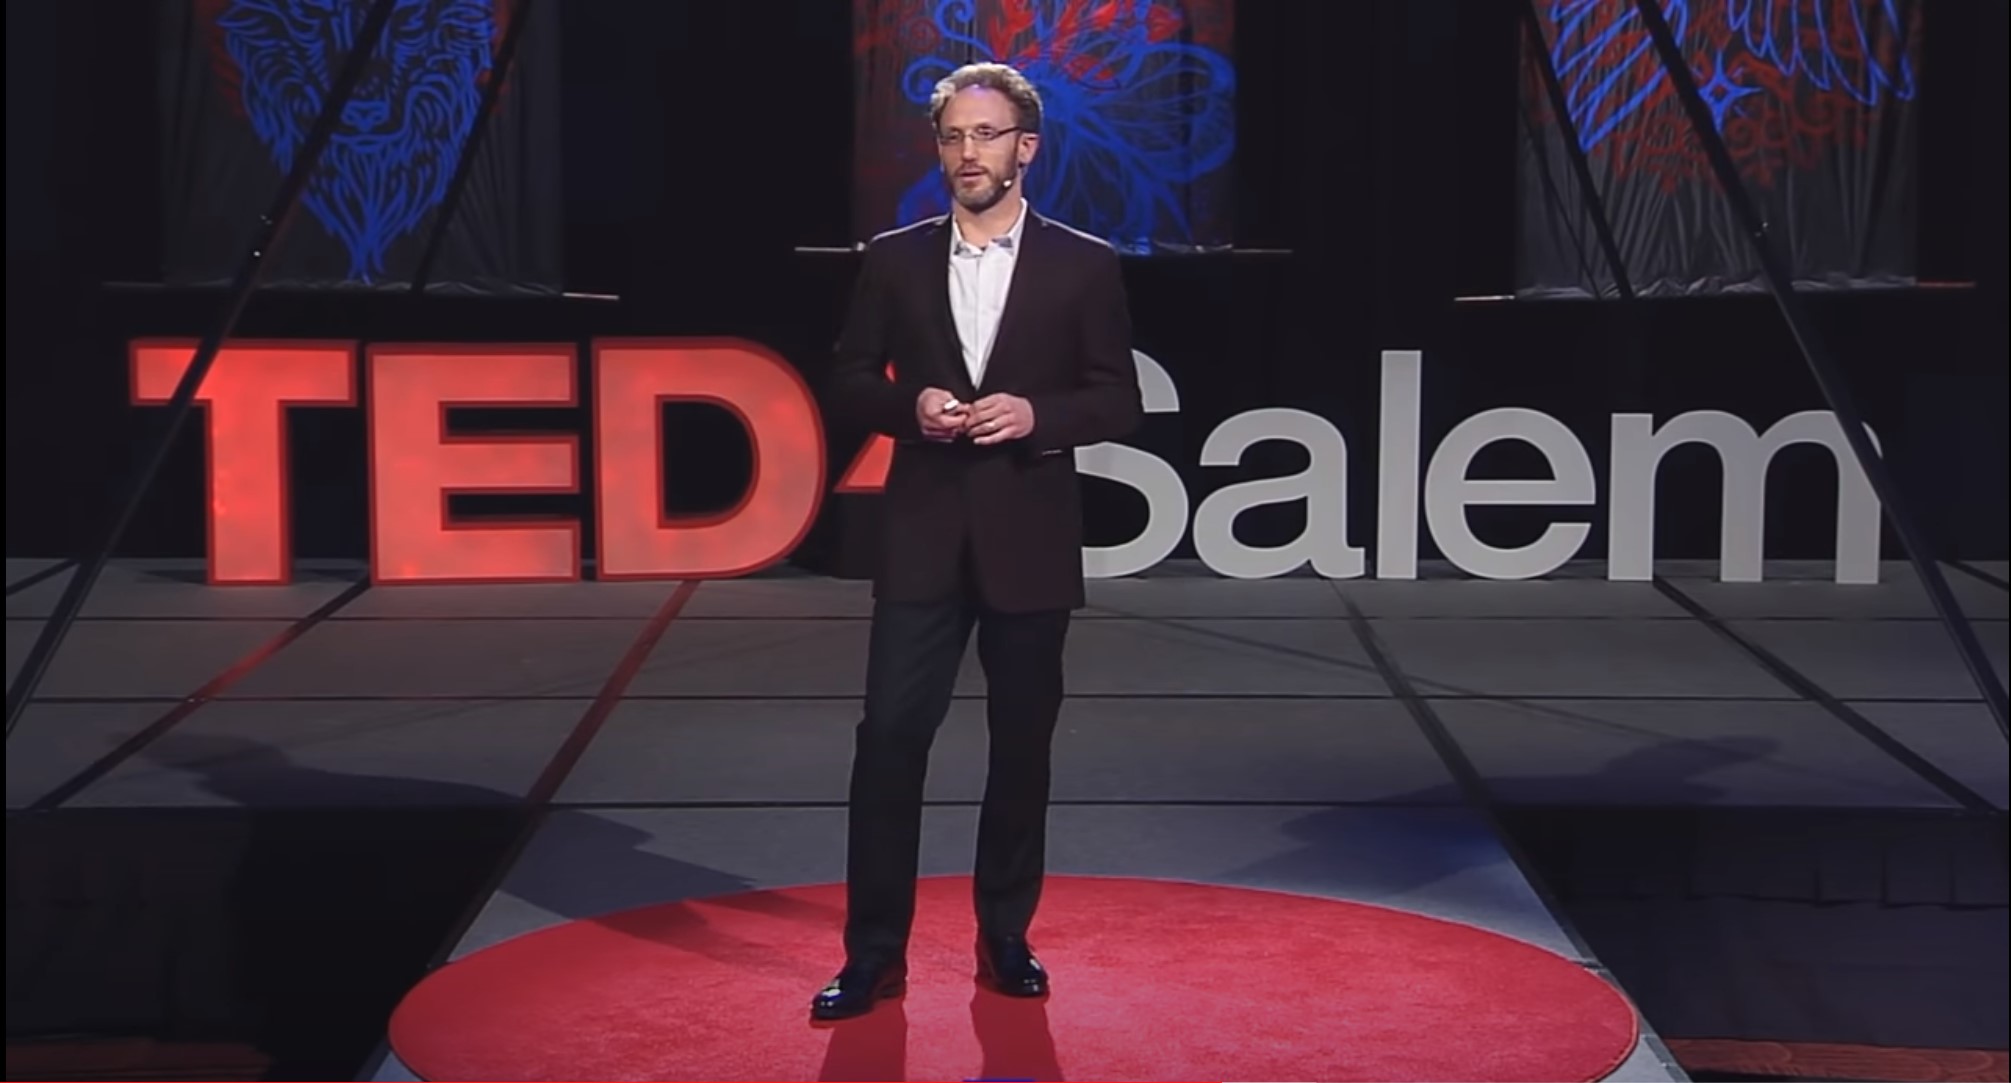 Tedx talk on floating for stress and anxiety